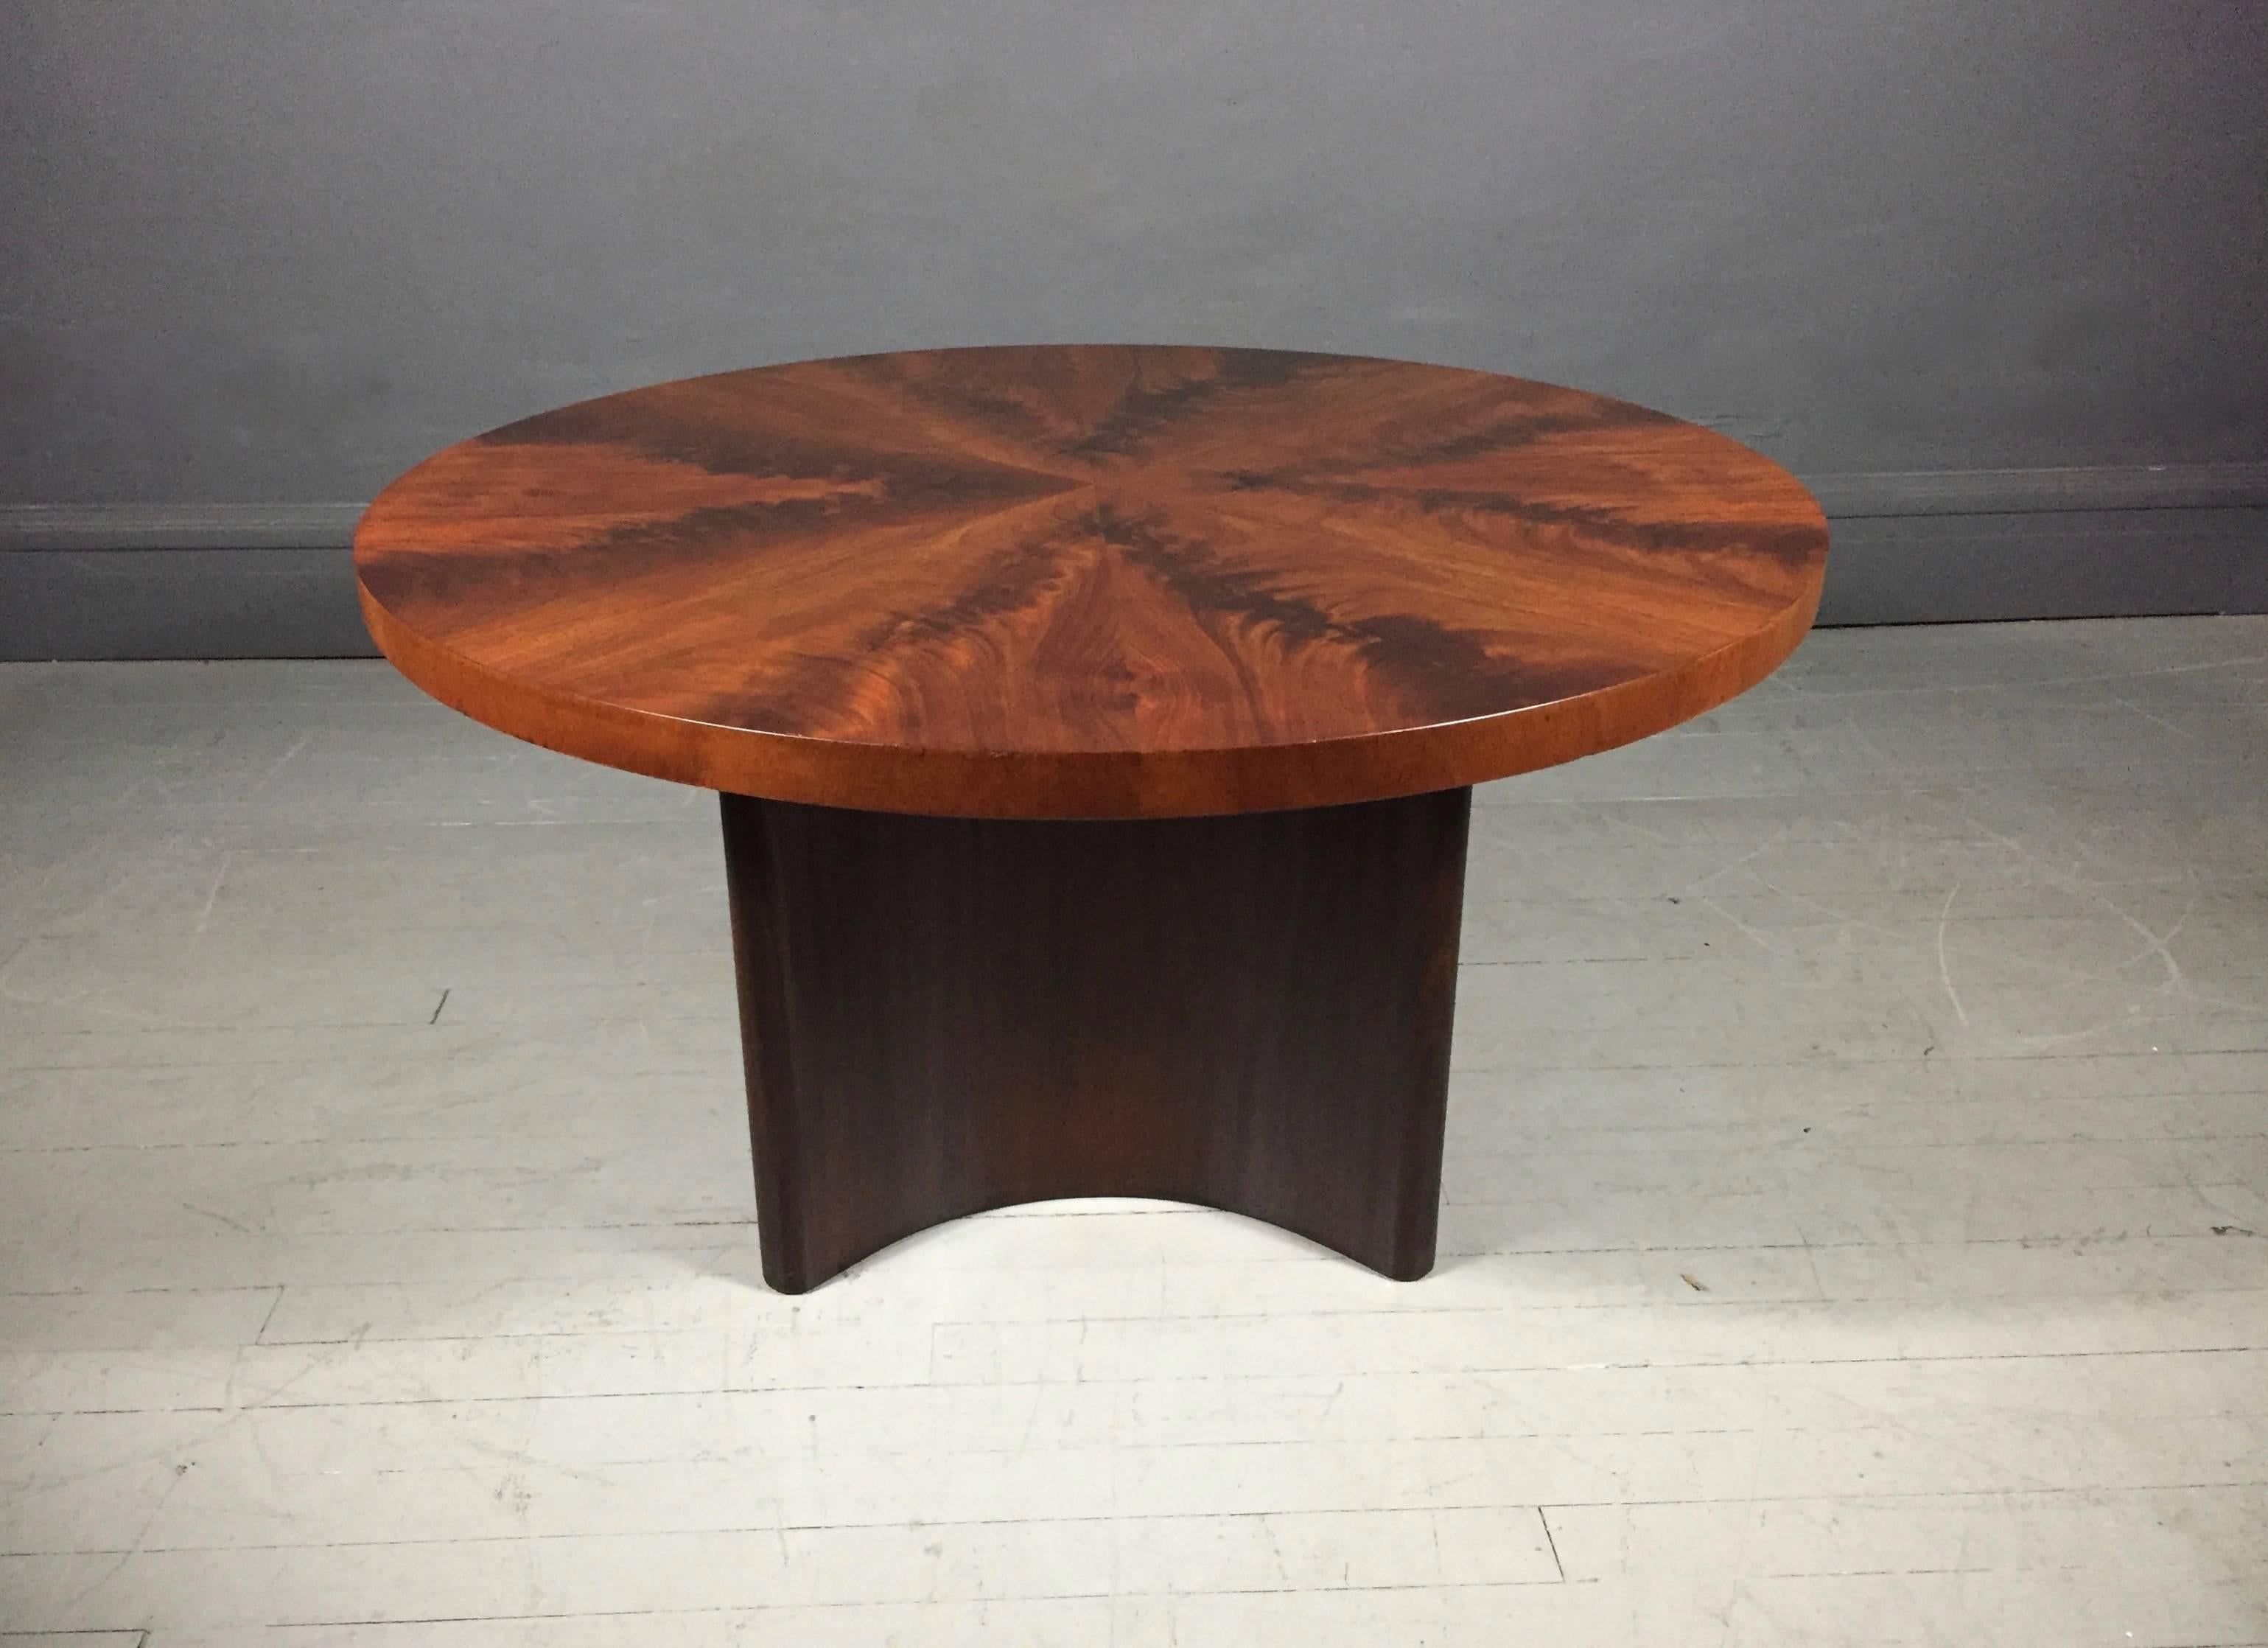 Architecturally beautiful coffee table with well placed perfect four-section crotch mahogany veneer top and four-part curved walnut base. By Mjolby Intarsia, Sweden. Dated at bottom 8.29.1940 and marked with three crowns, R and Mjolby.